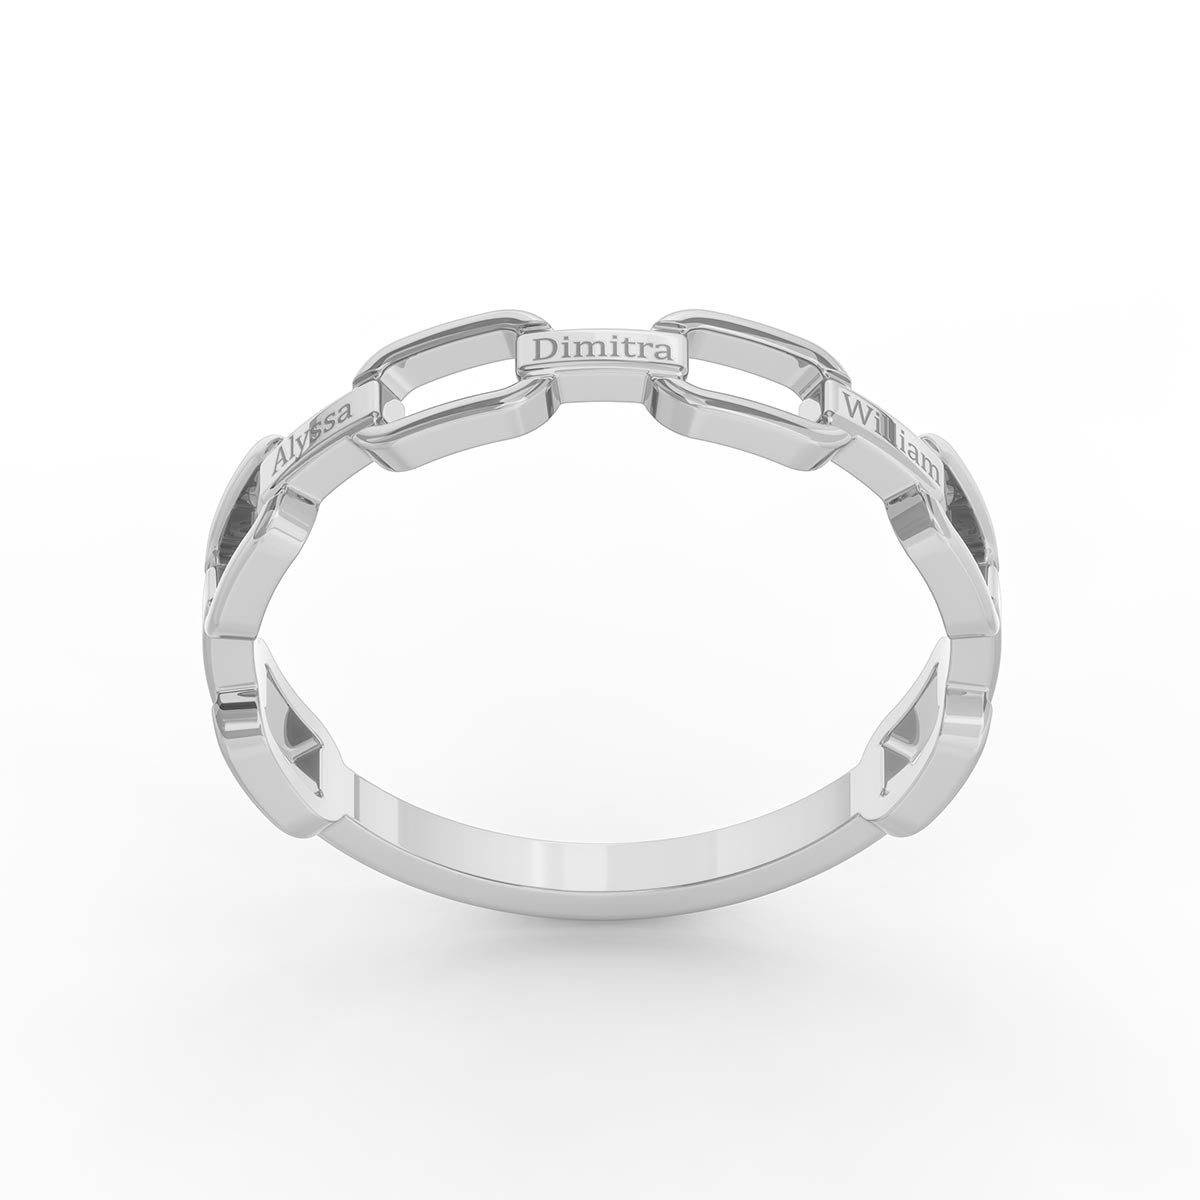 Chain Link Ring with Personalized Engravings